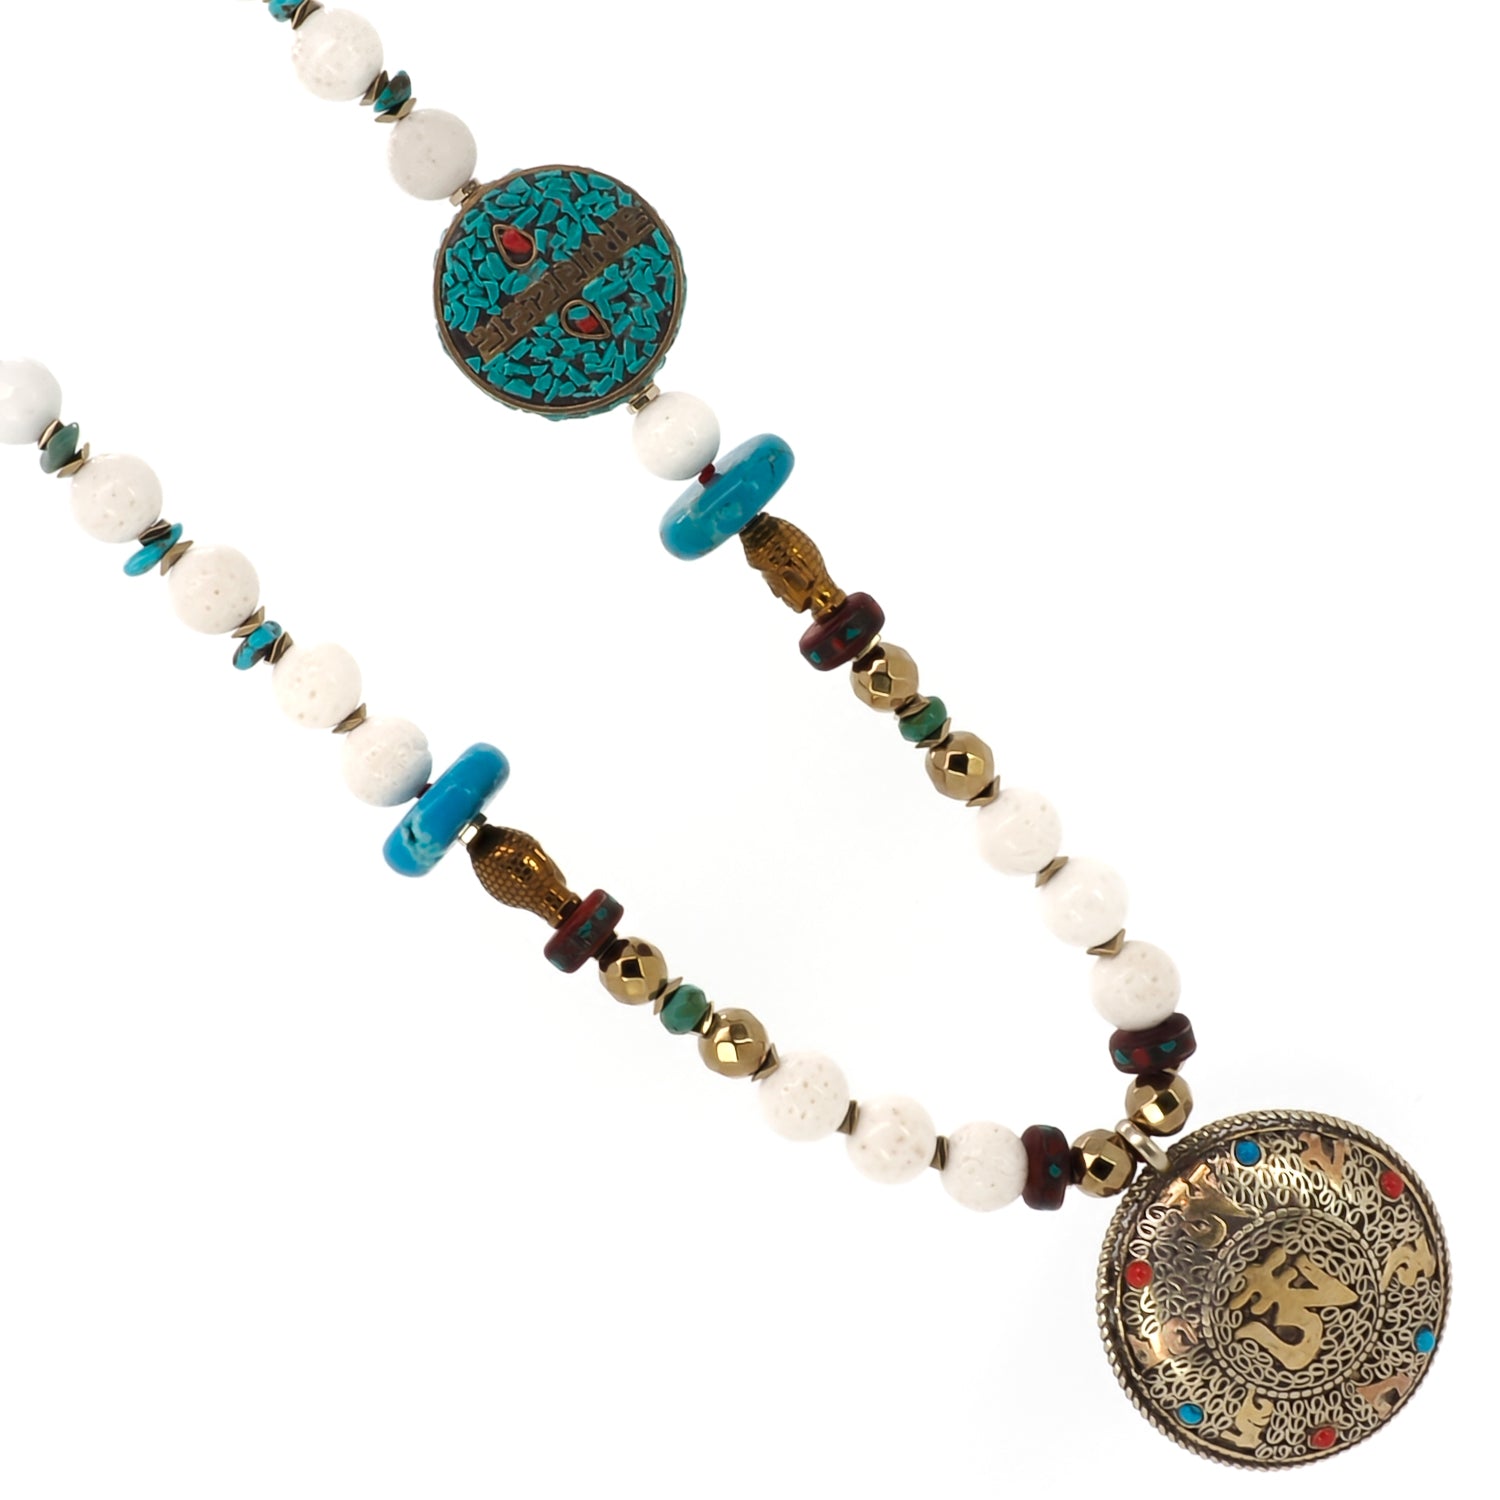 Spiritual Journey: Handcrafted pendant with turquoise and coral on the Mantra Necklace.